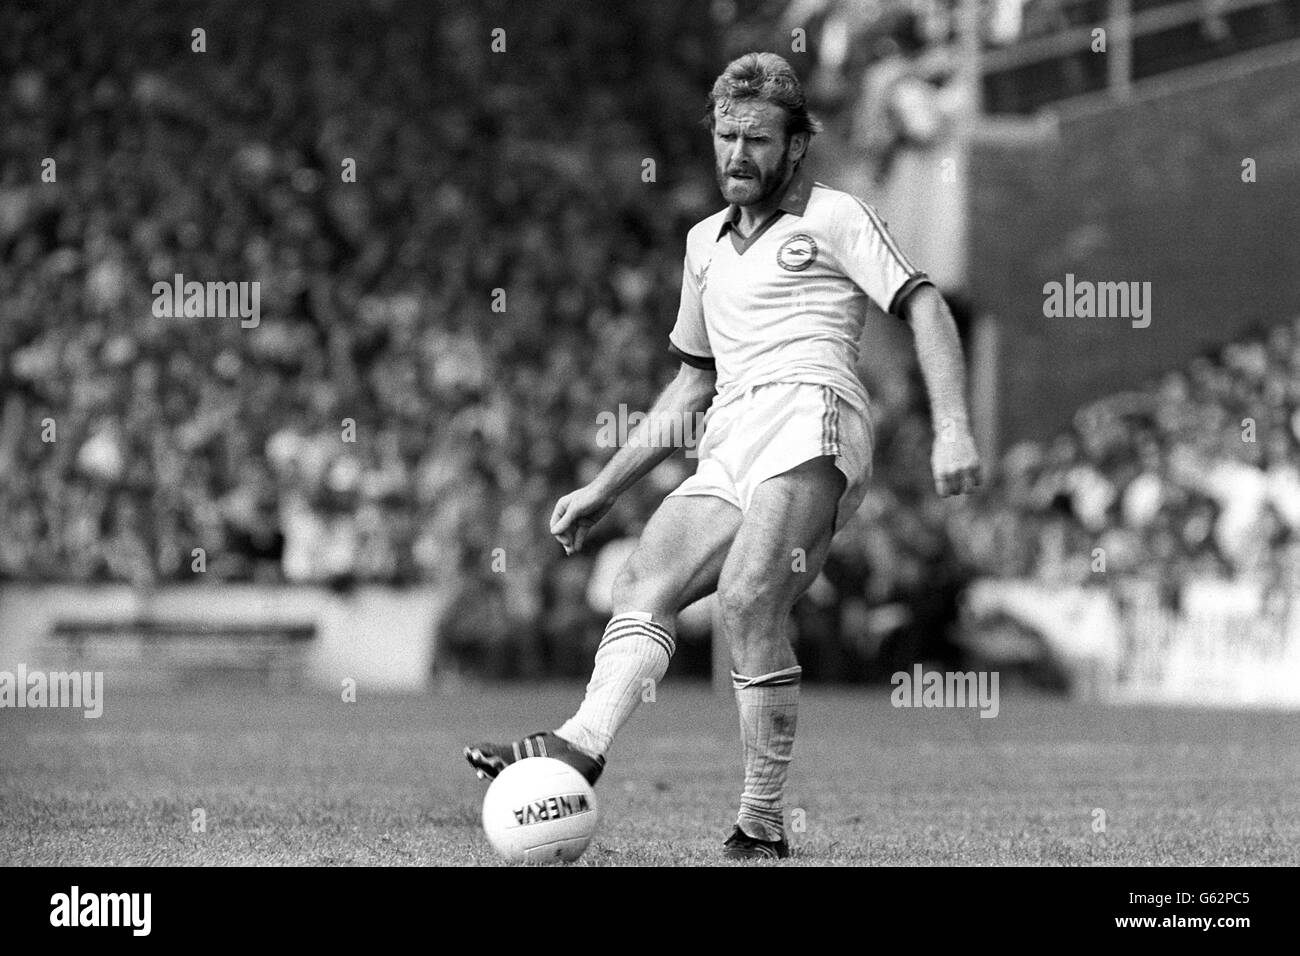 In action for Brighton & Hove Albion FC is Tony Grealish. The London-born midfielder also captains the Republic of Ireland team and joined Brighton earlier this year from Luton Town. He began his professional career at Leyton Orient FC. Stock Photo